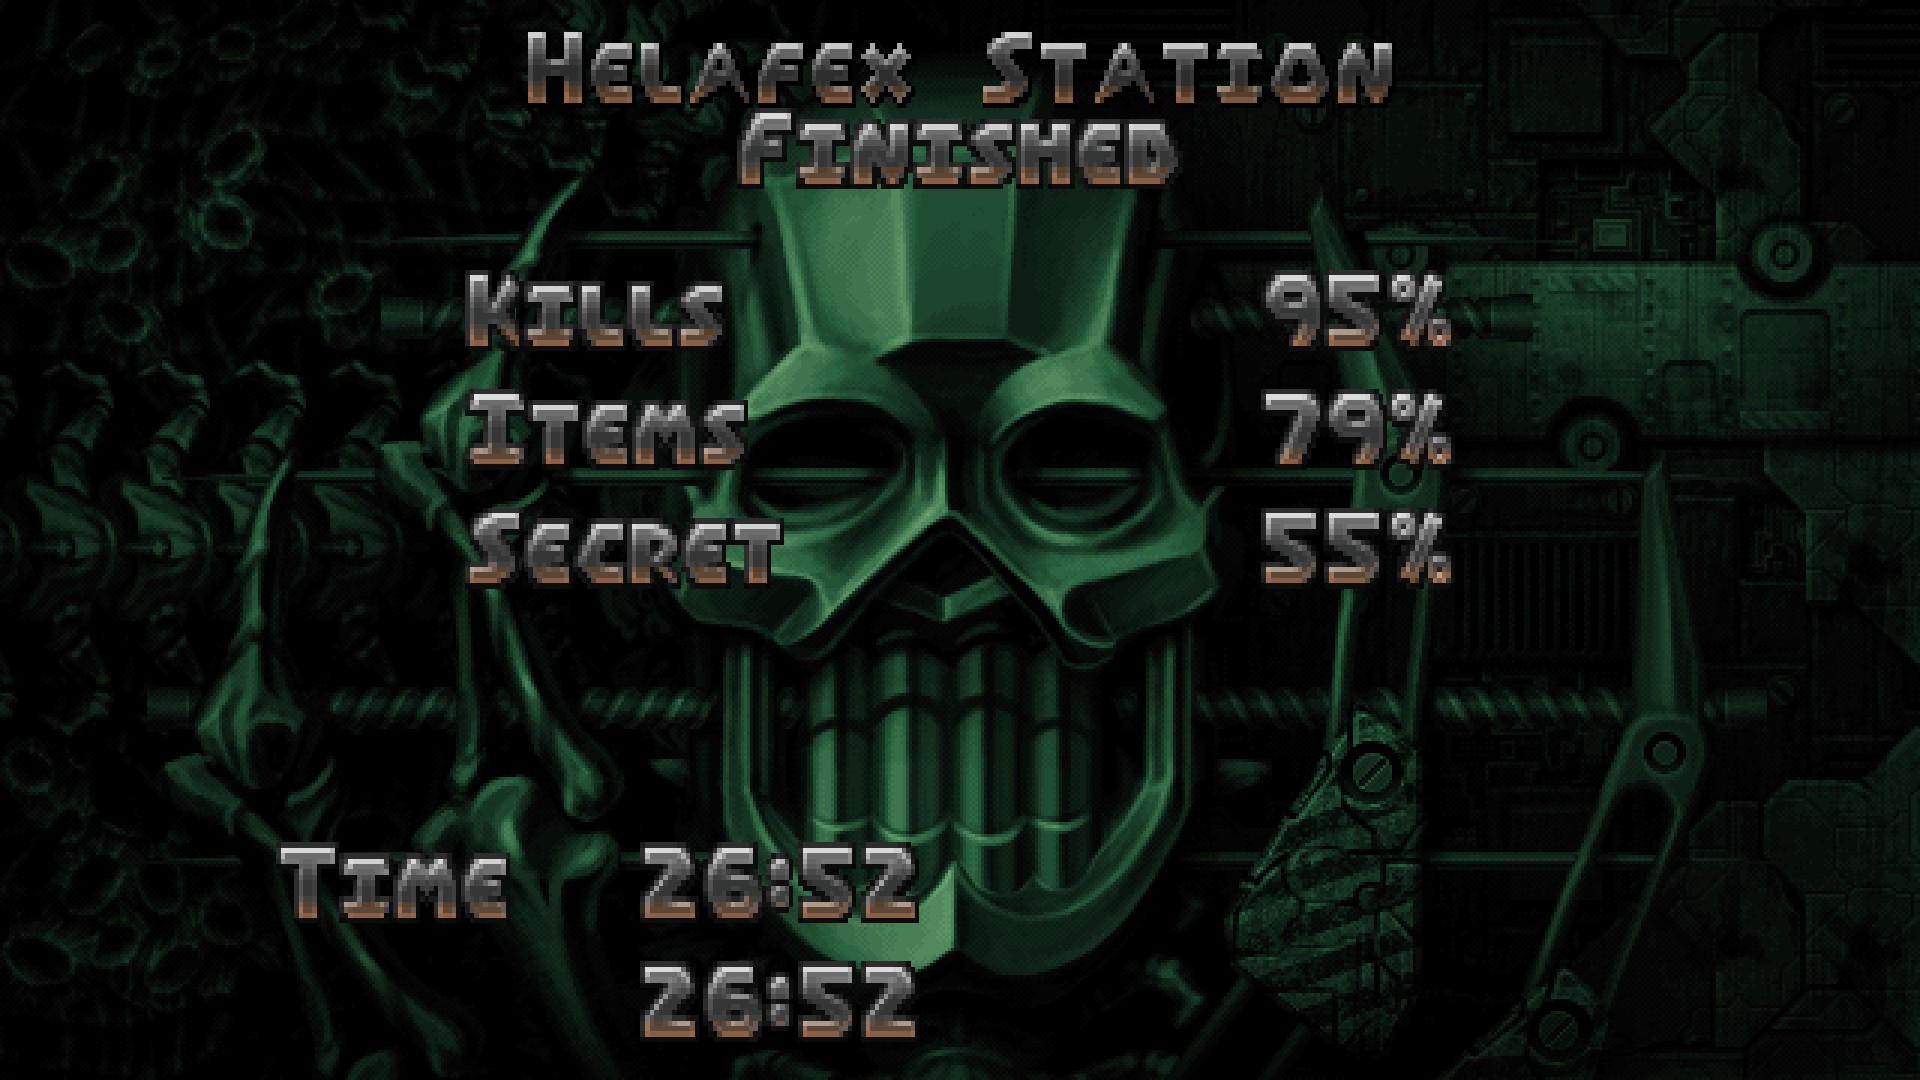 A static image with a text breakdown summary of the level completion, including kills, items, secret areas, and time.